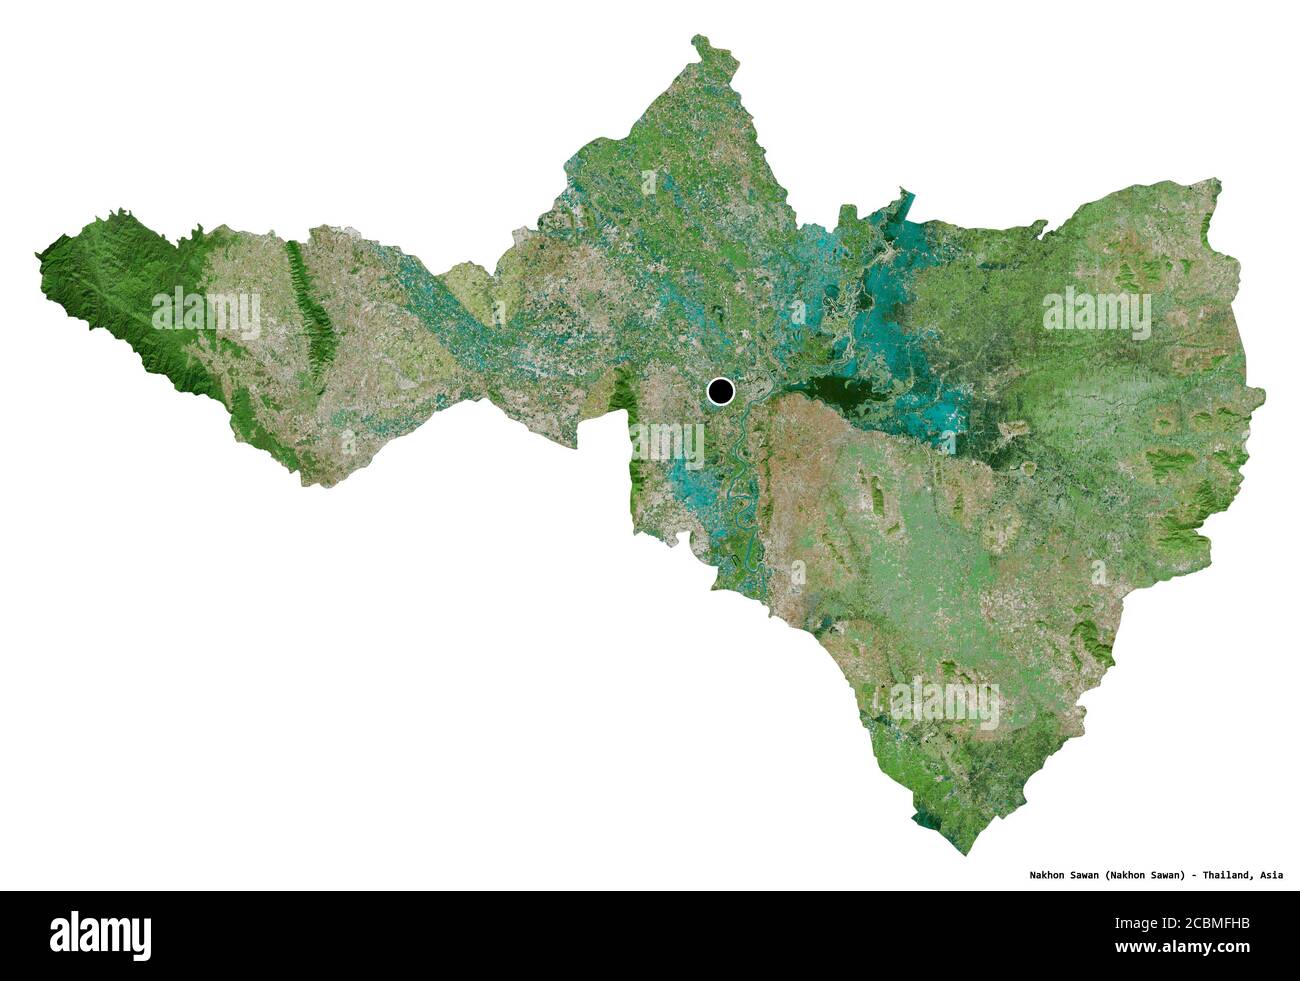 Shape of Nakhon Sawan, province of Thailand, with its capital isolated on white background. Satellite imagery. 3D rendering Stock Photo